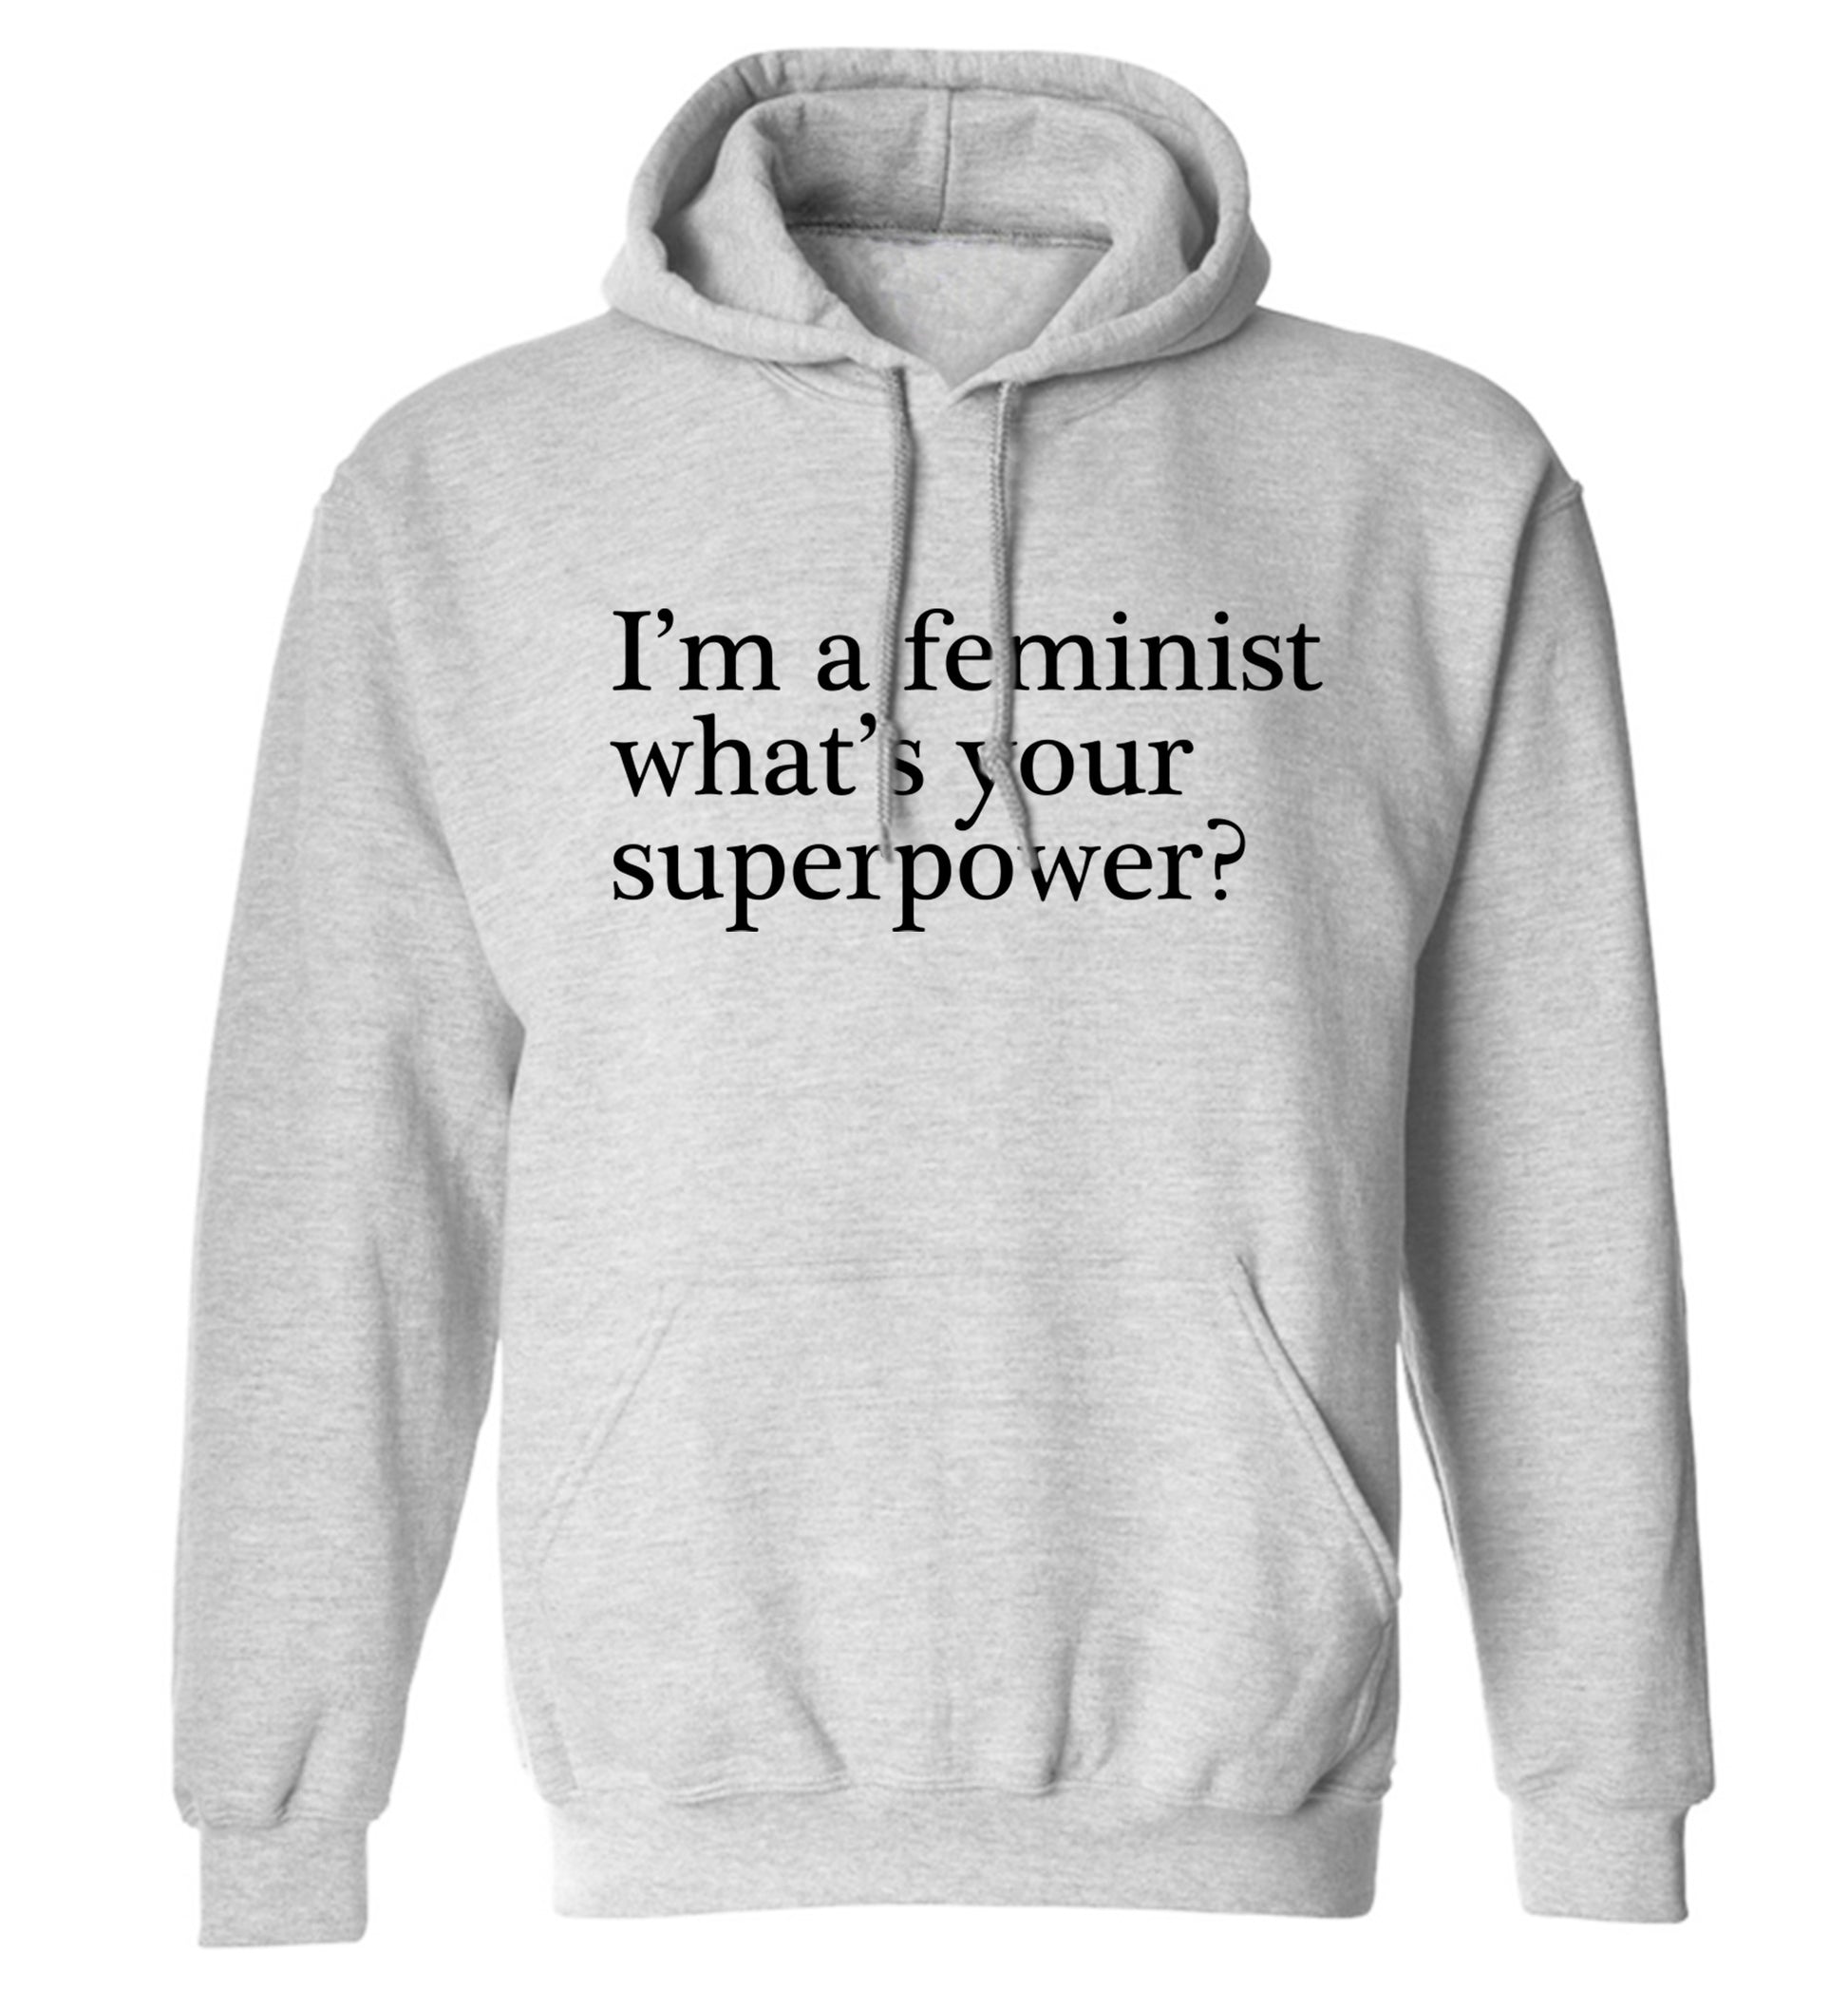 I'm a feminist what's your superpower? adults unisex grey hoodie 2XL